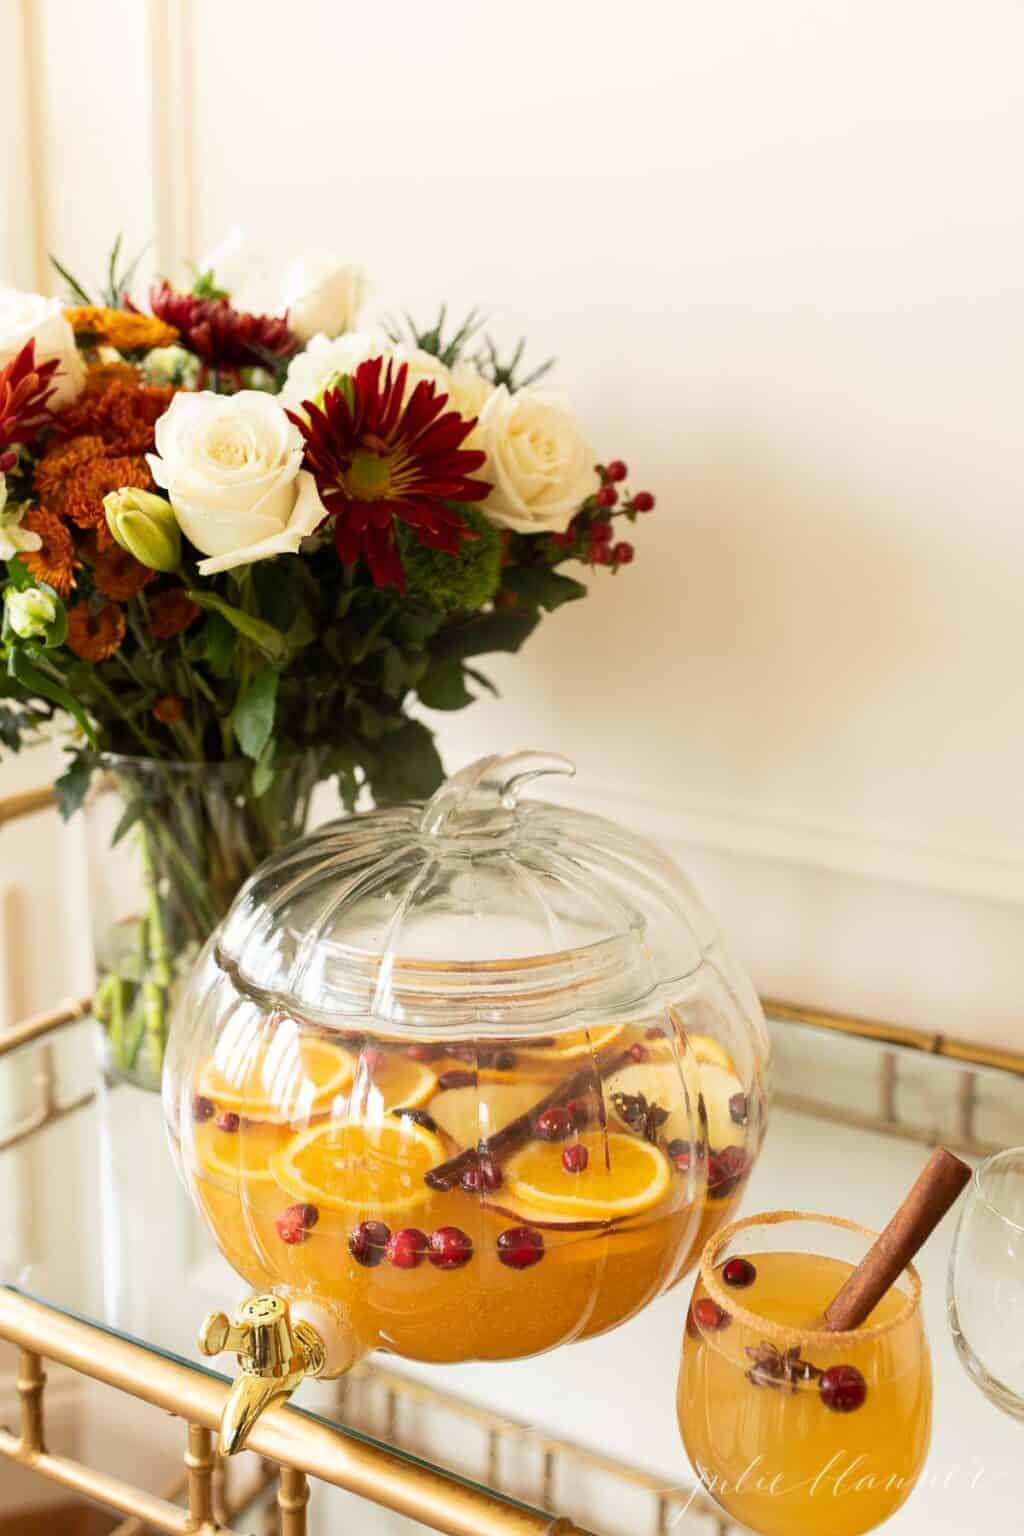 A clear glass pumpkin drink dispenser filled with apple cider sangria, flowers in the background.